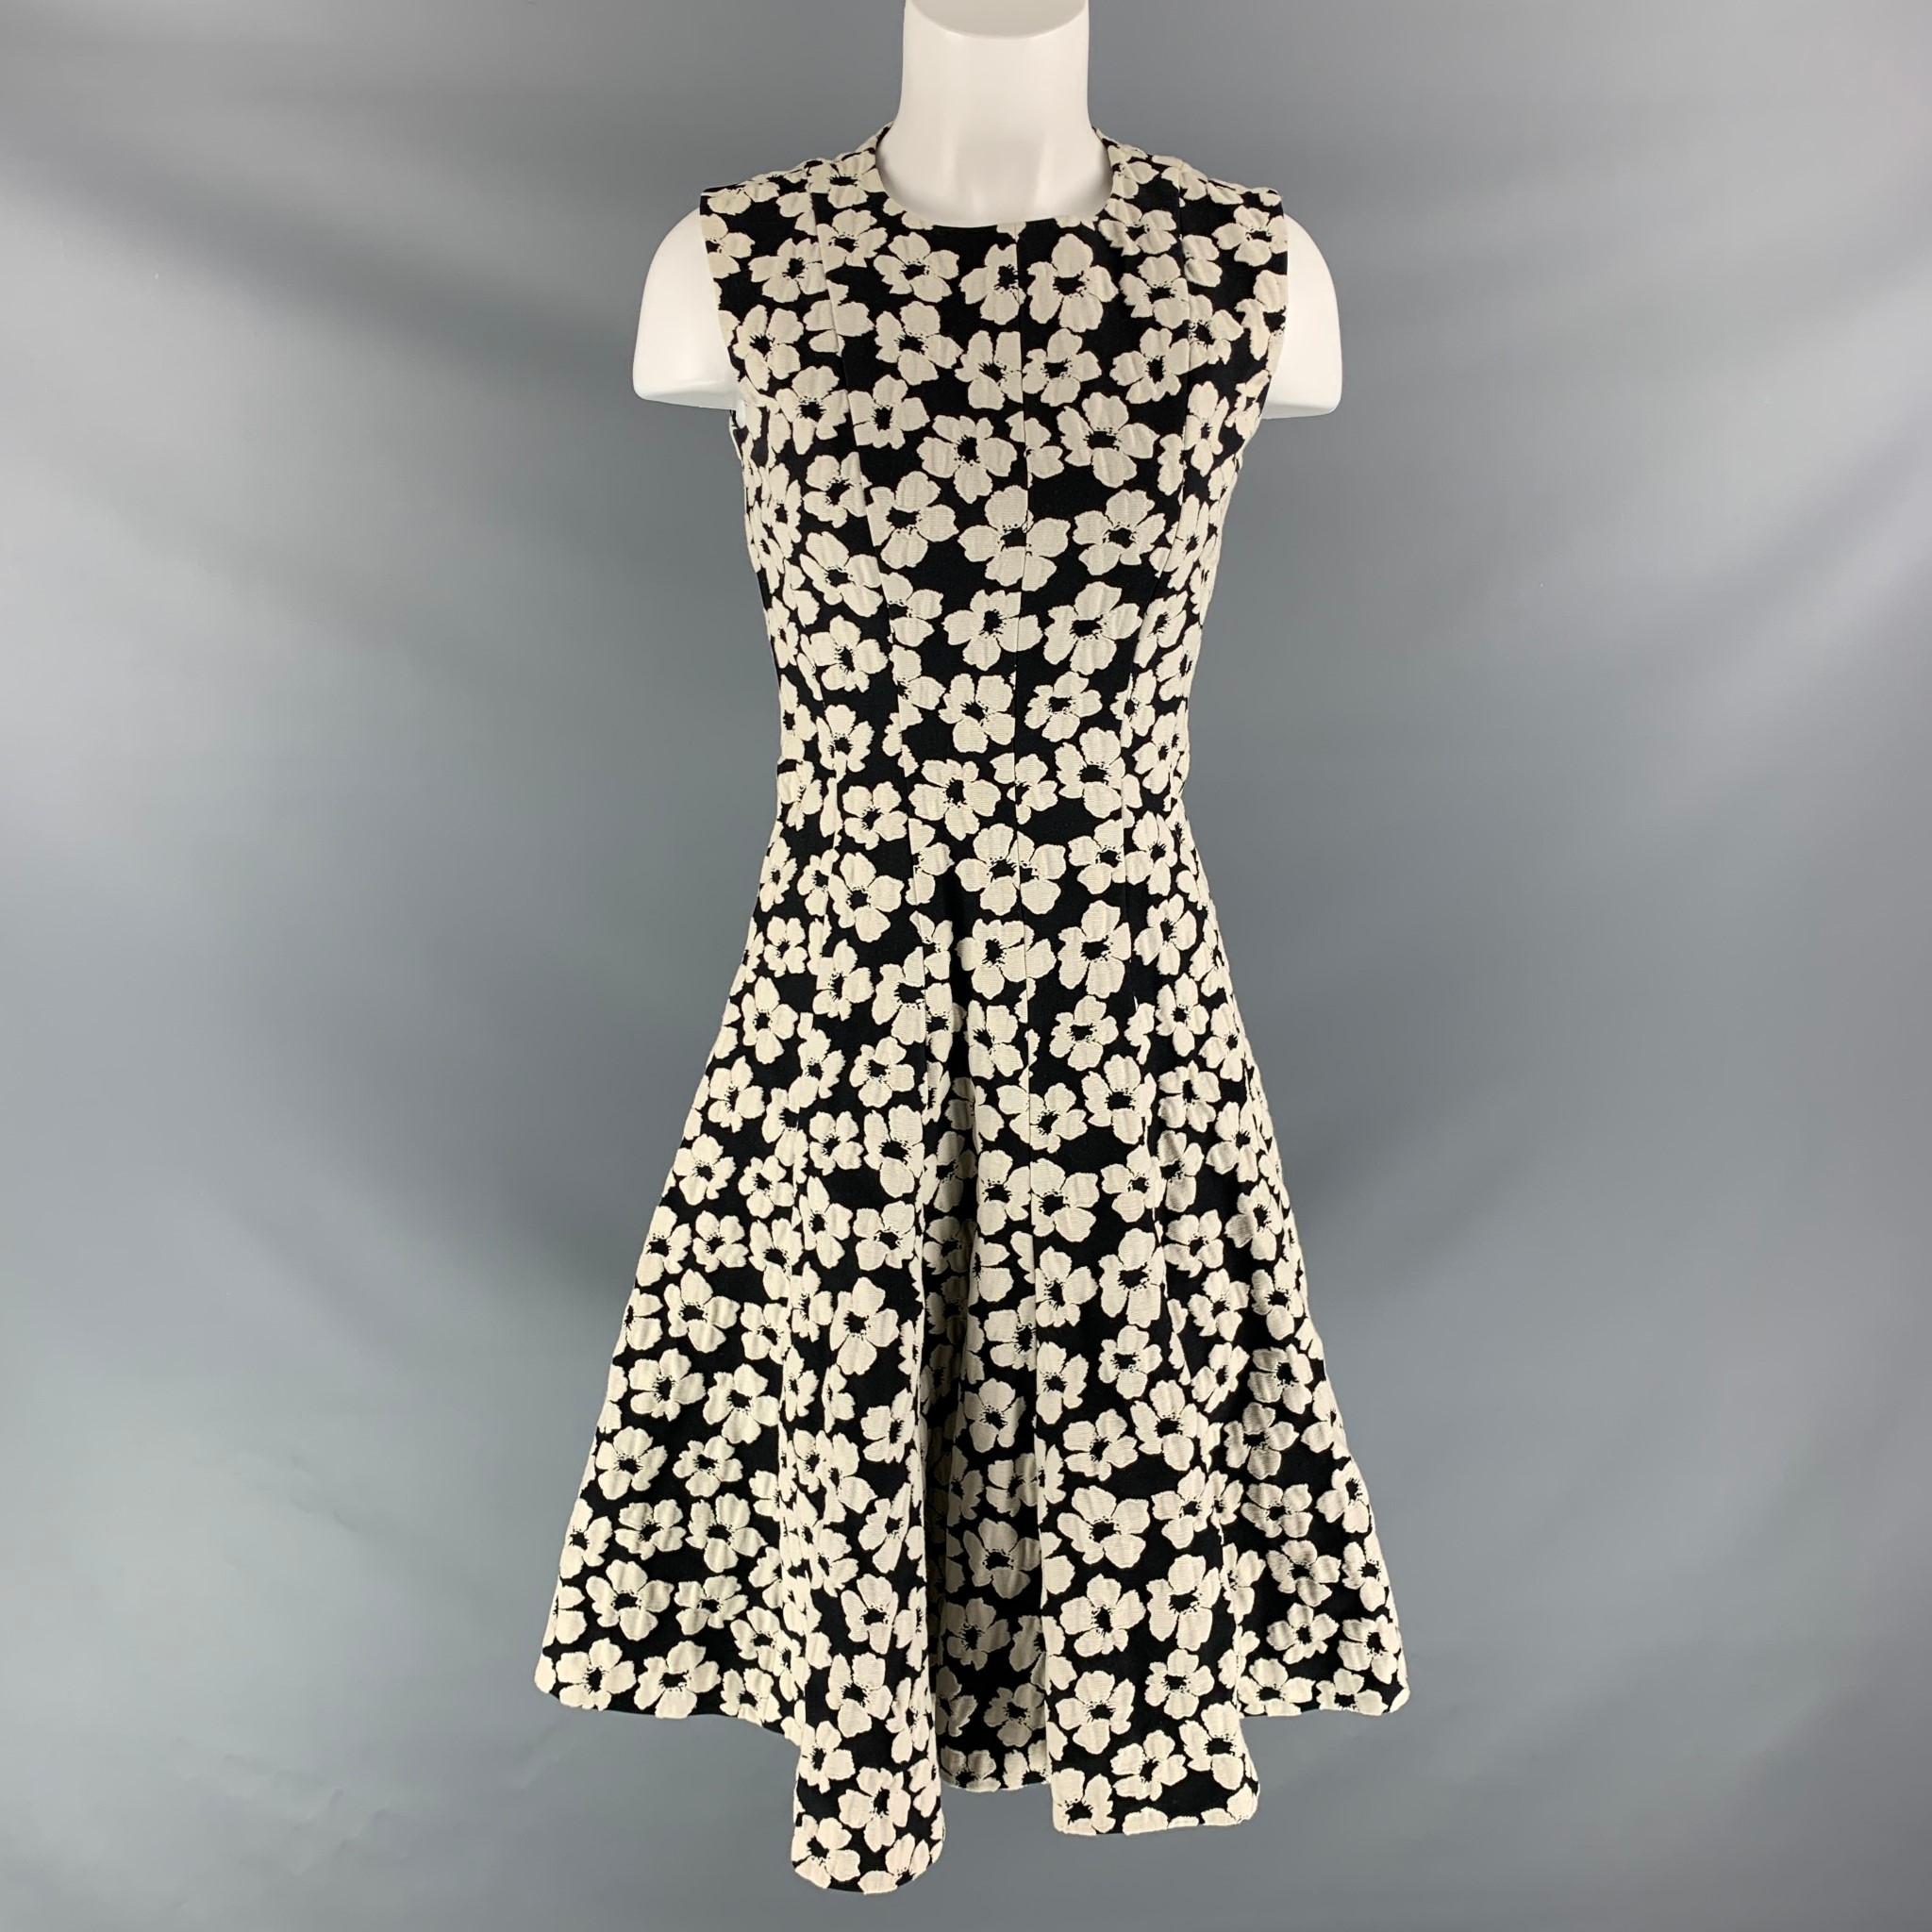 CH CAROLINA HERRERA  mid-calf dress comes in black and white floral cotton blend fabric features a full skirt. Made in Portugal.

Excellent Pre-Owned Condition.
Marked: Size tag removed.

Measurements:

Shoulder:13.5 in
Bust: 32 in
Waist: 26 in